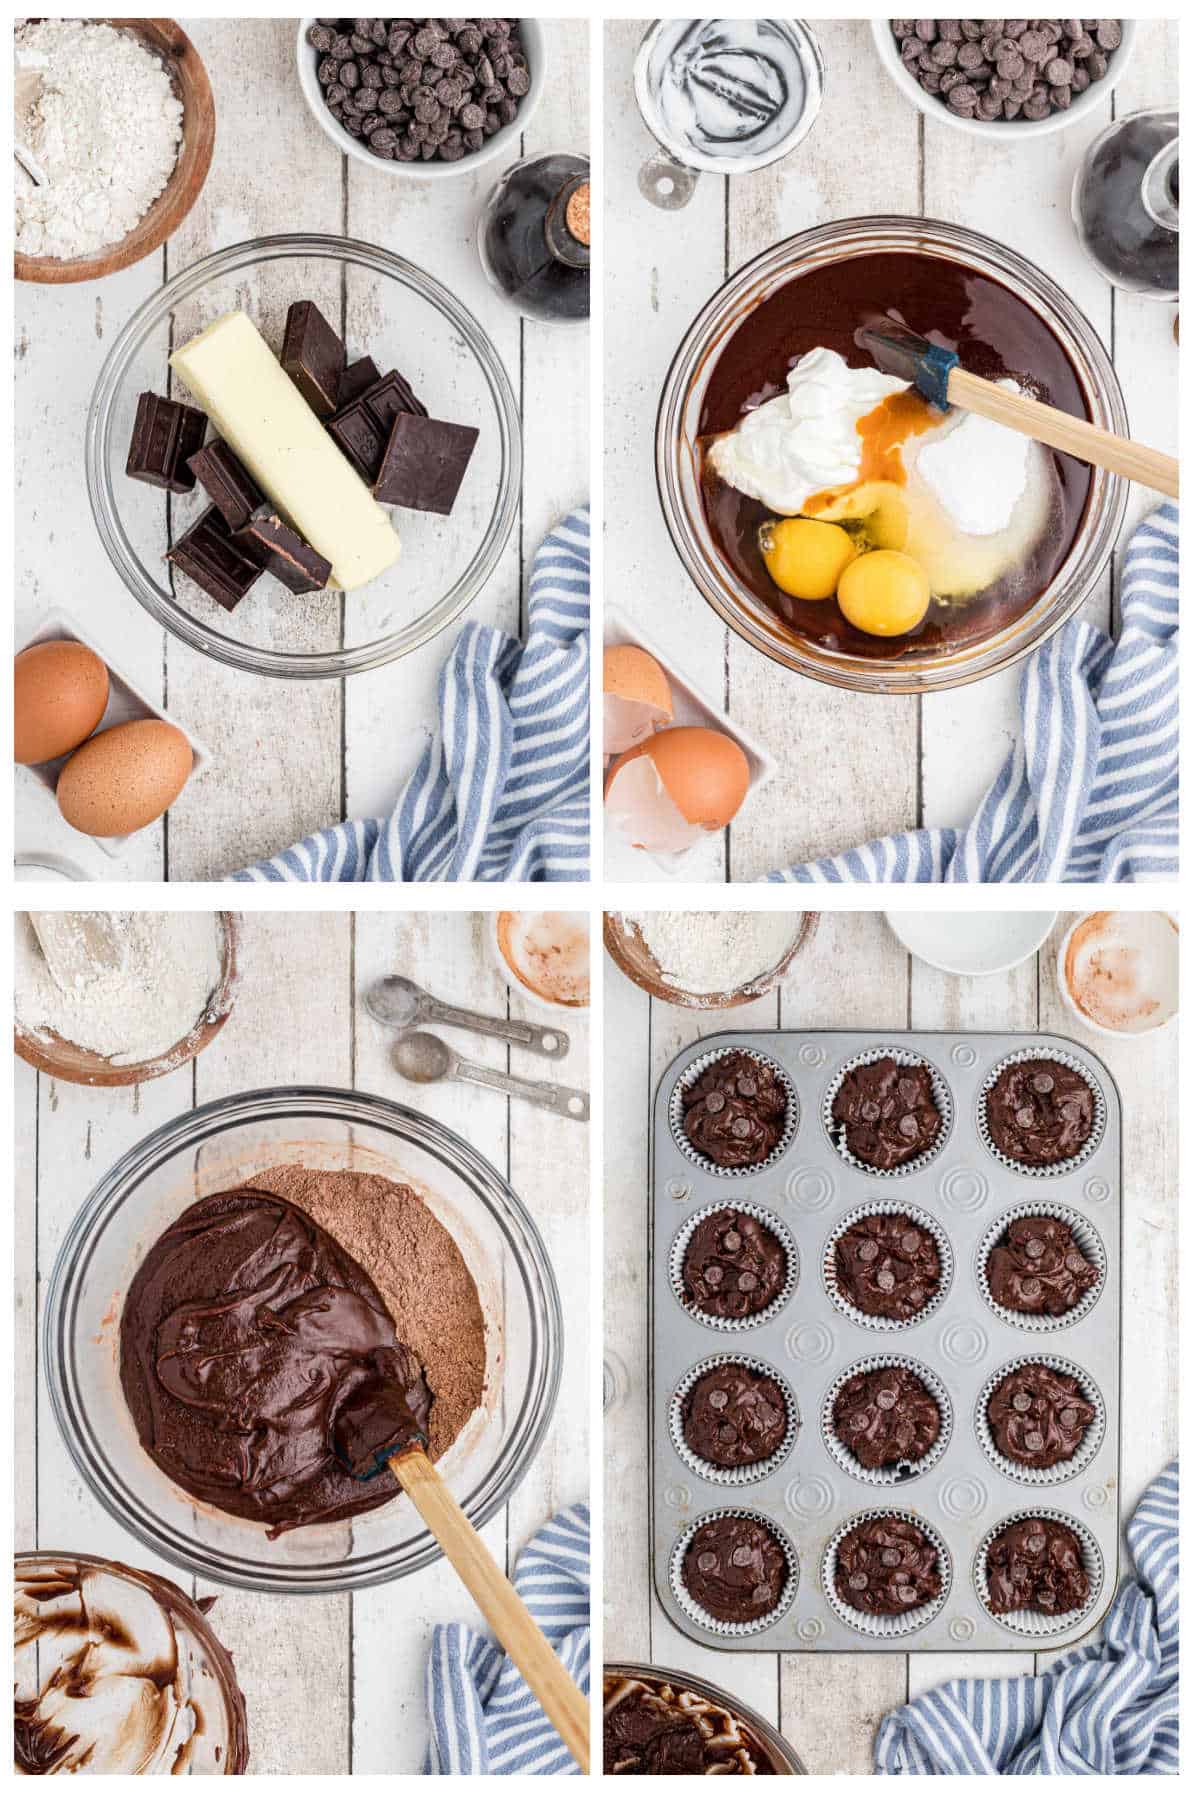 Step by step images showing how to make these triple chocolate muffins.